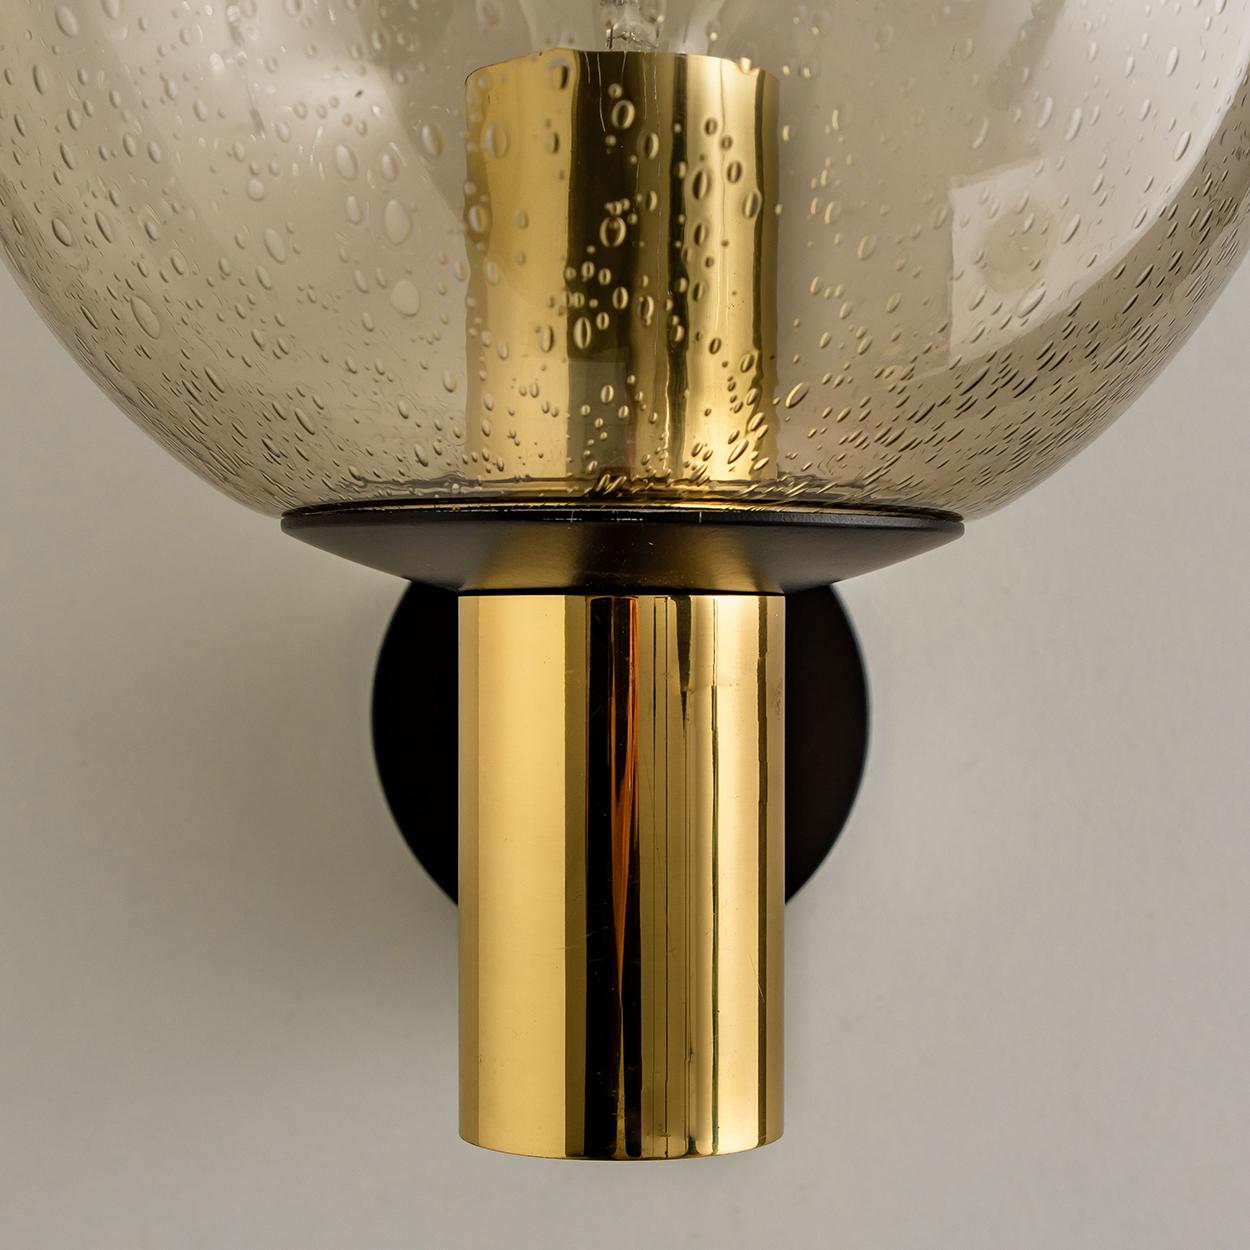 1 of the 3 Pair of Glass Brass Wall Lamps by Glashütte Limburg, 1975s For Sale 2